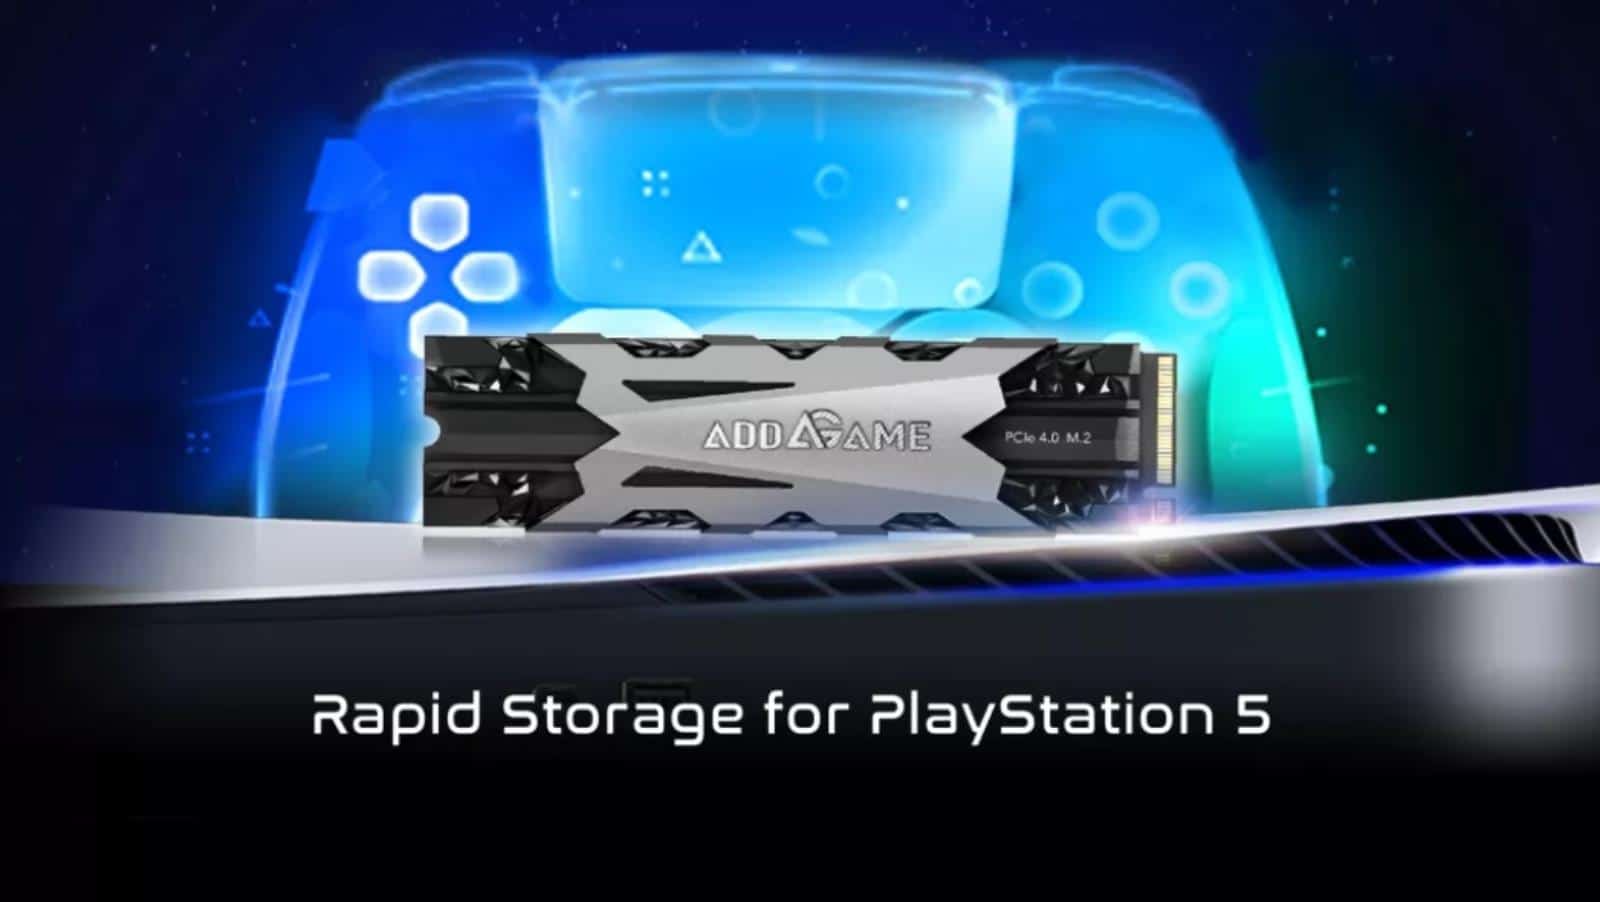 New disks optimized for PlayStation 5. Here is AddGame A95 with up to 7.4 GB / s reading